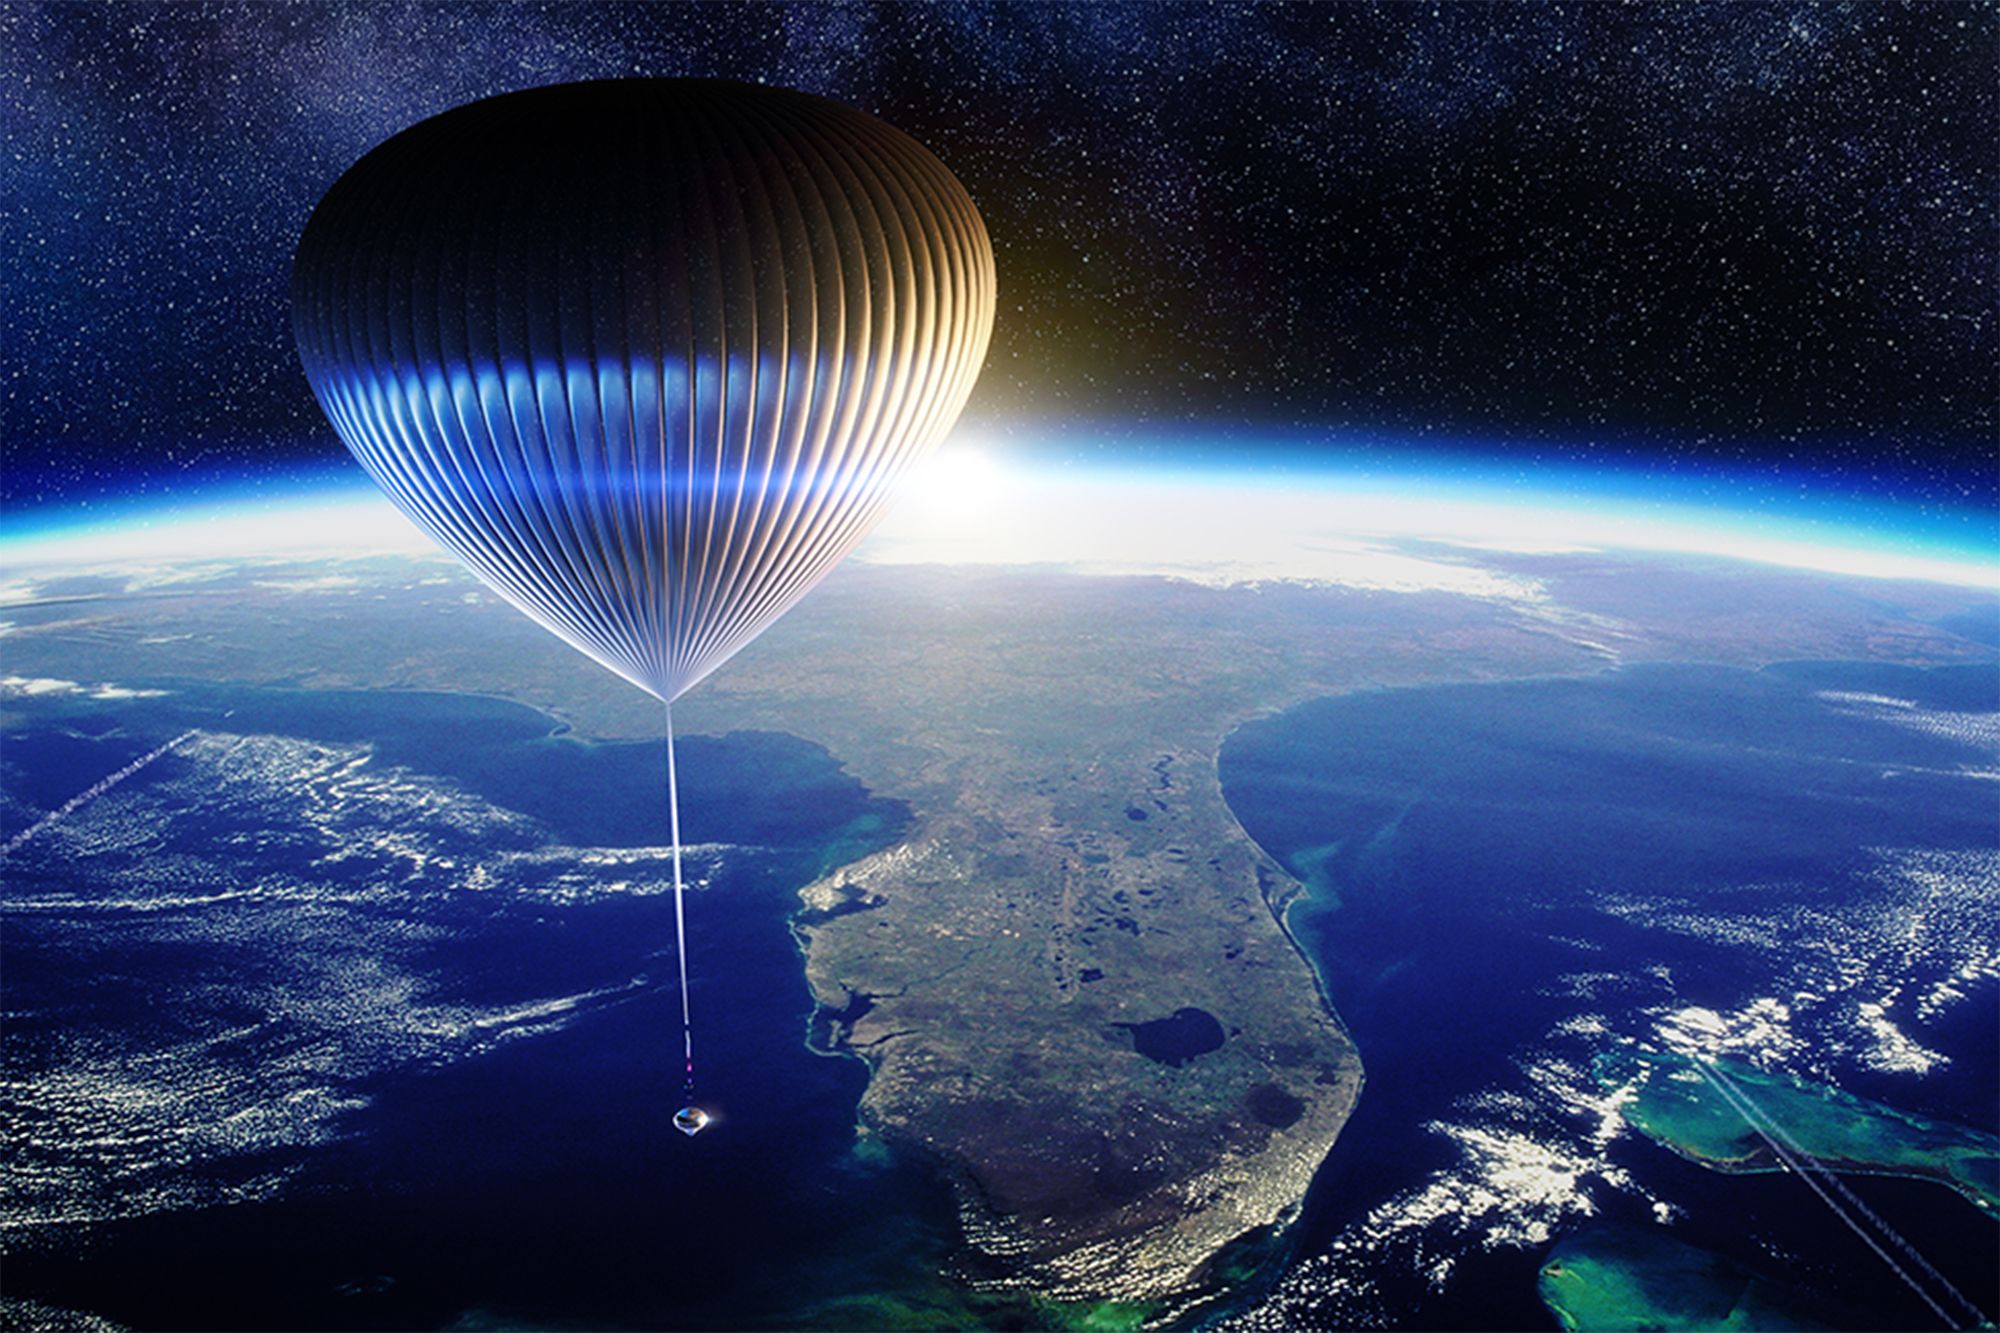 The Neptune Space Balloon Will Take You 100,000 Feet Above Ground